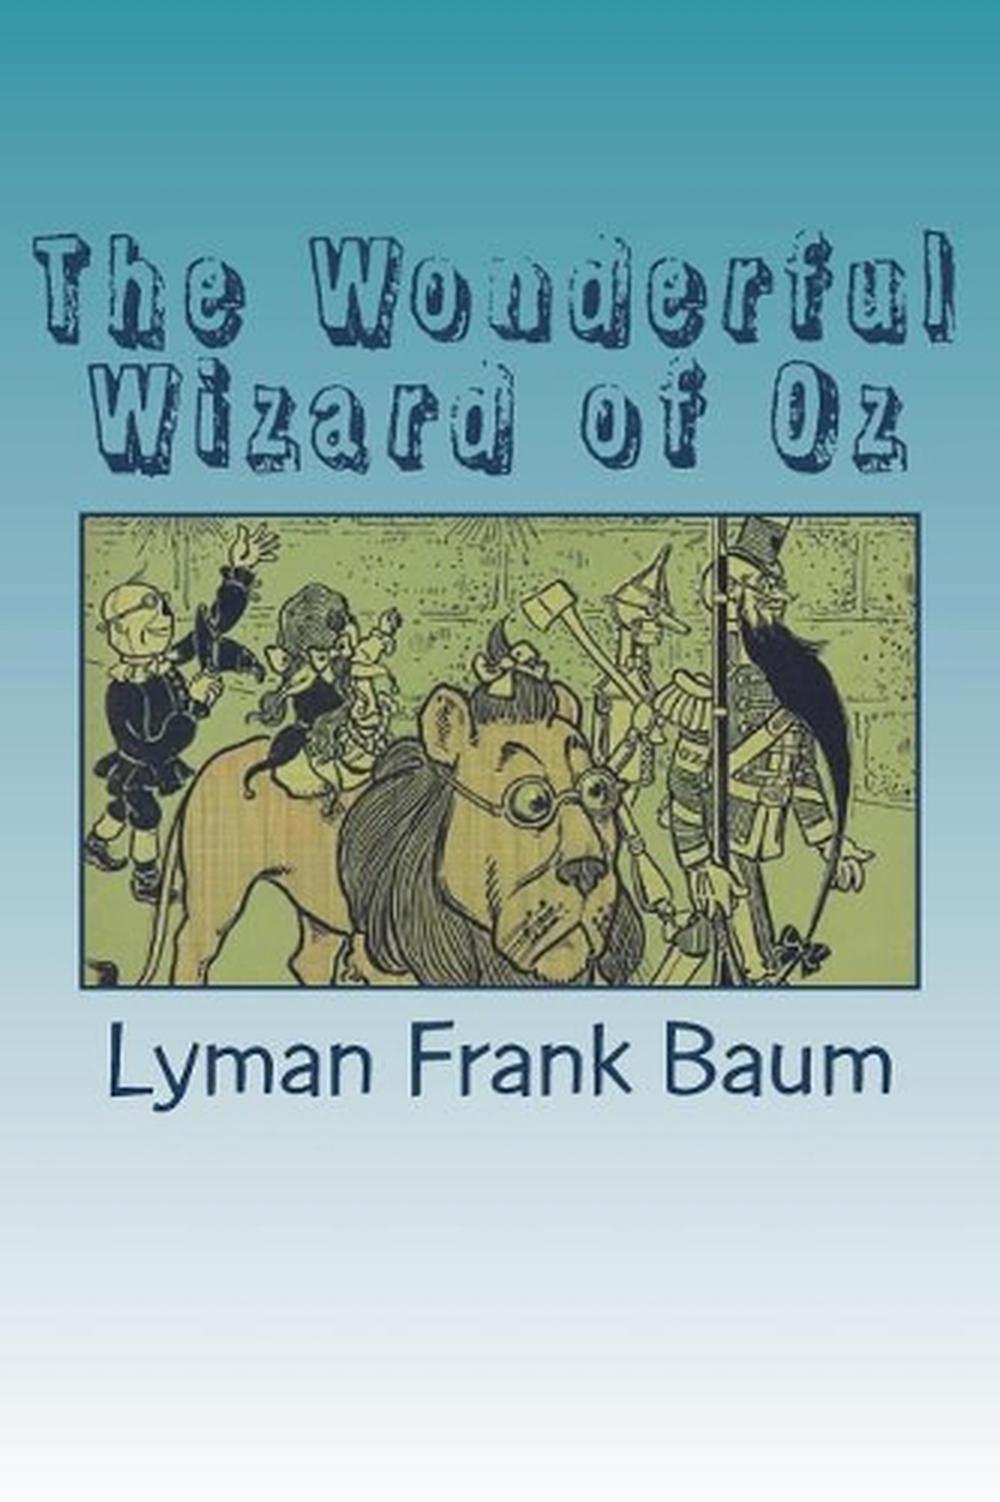 the wizard of oz book by frank baum